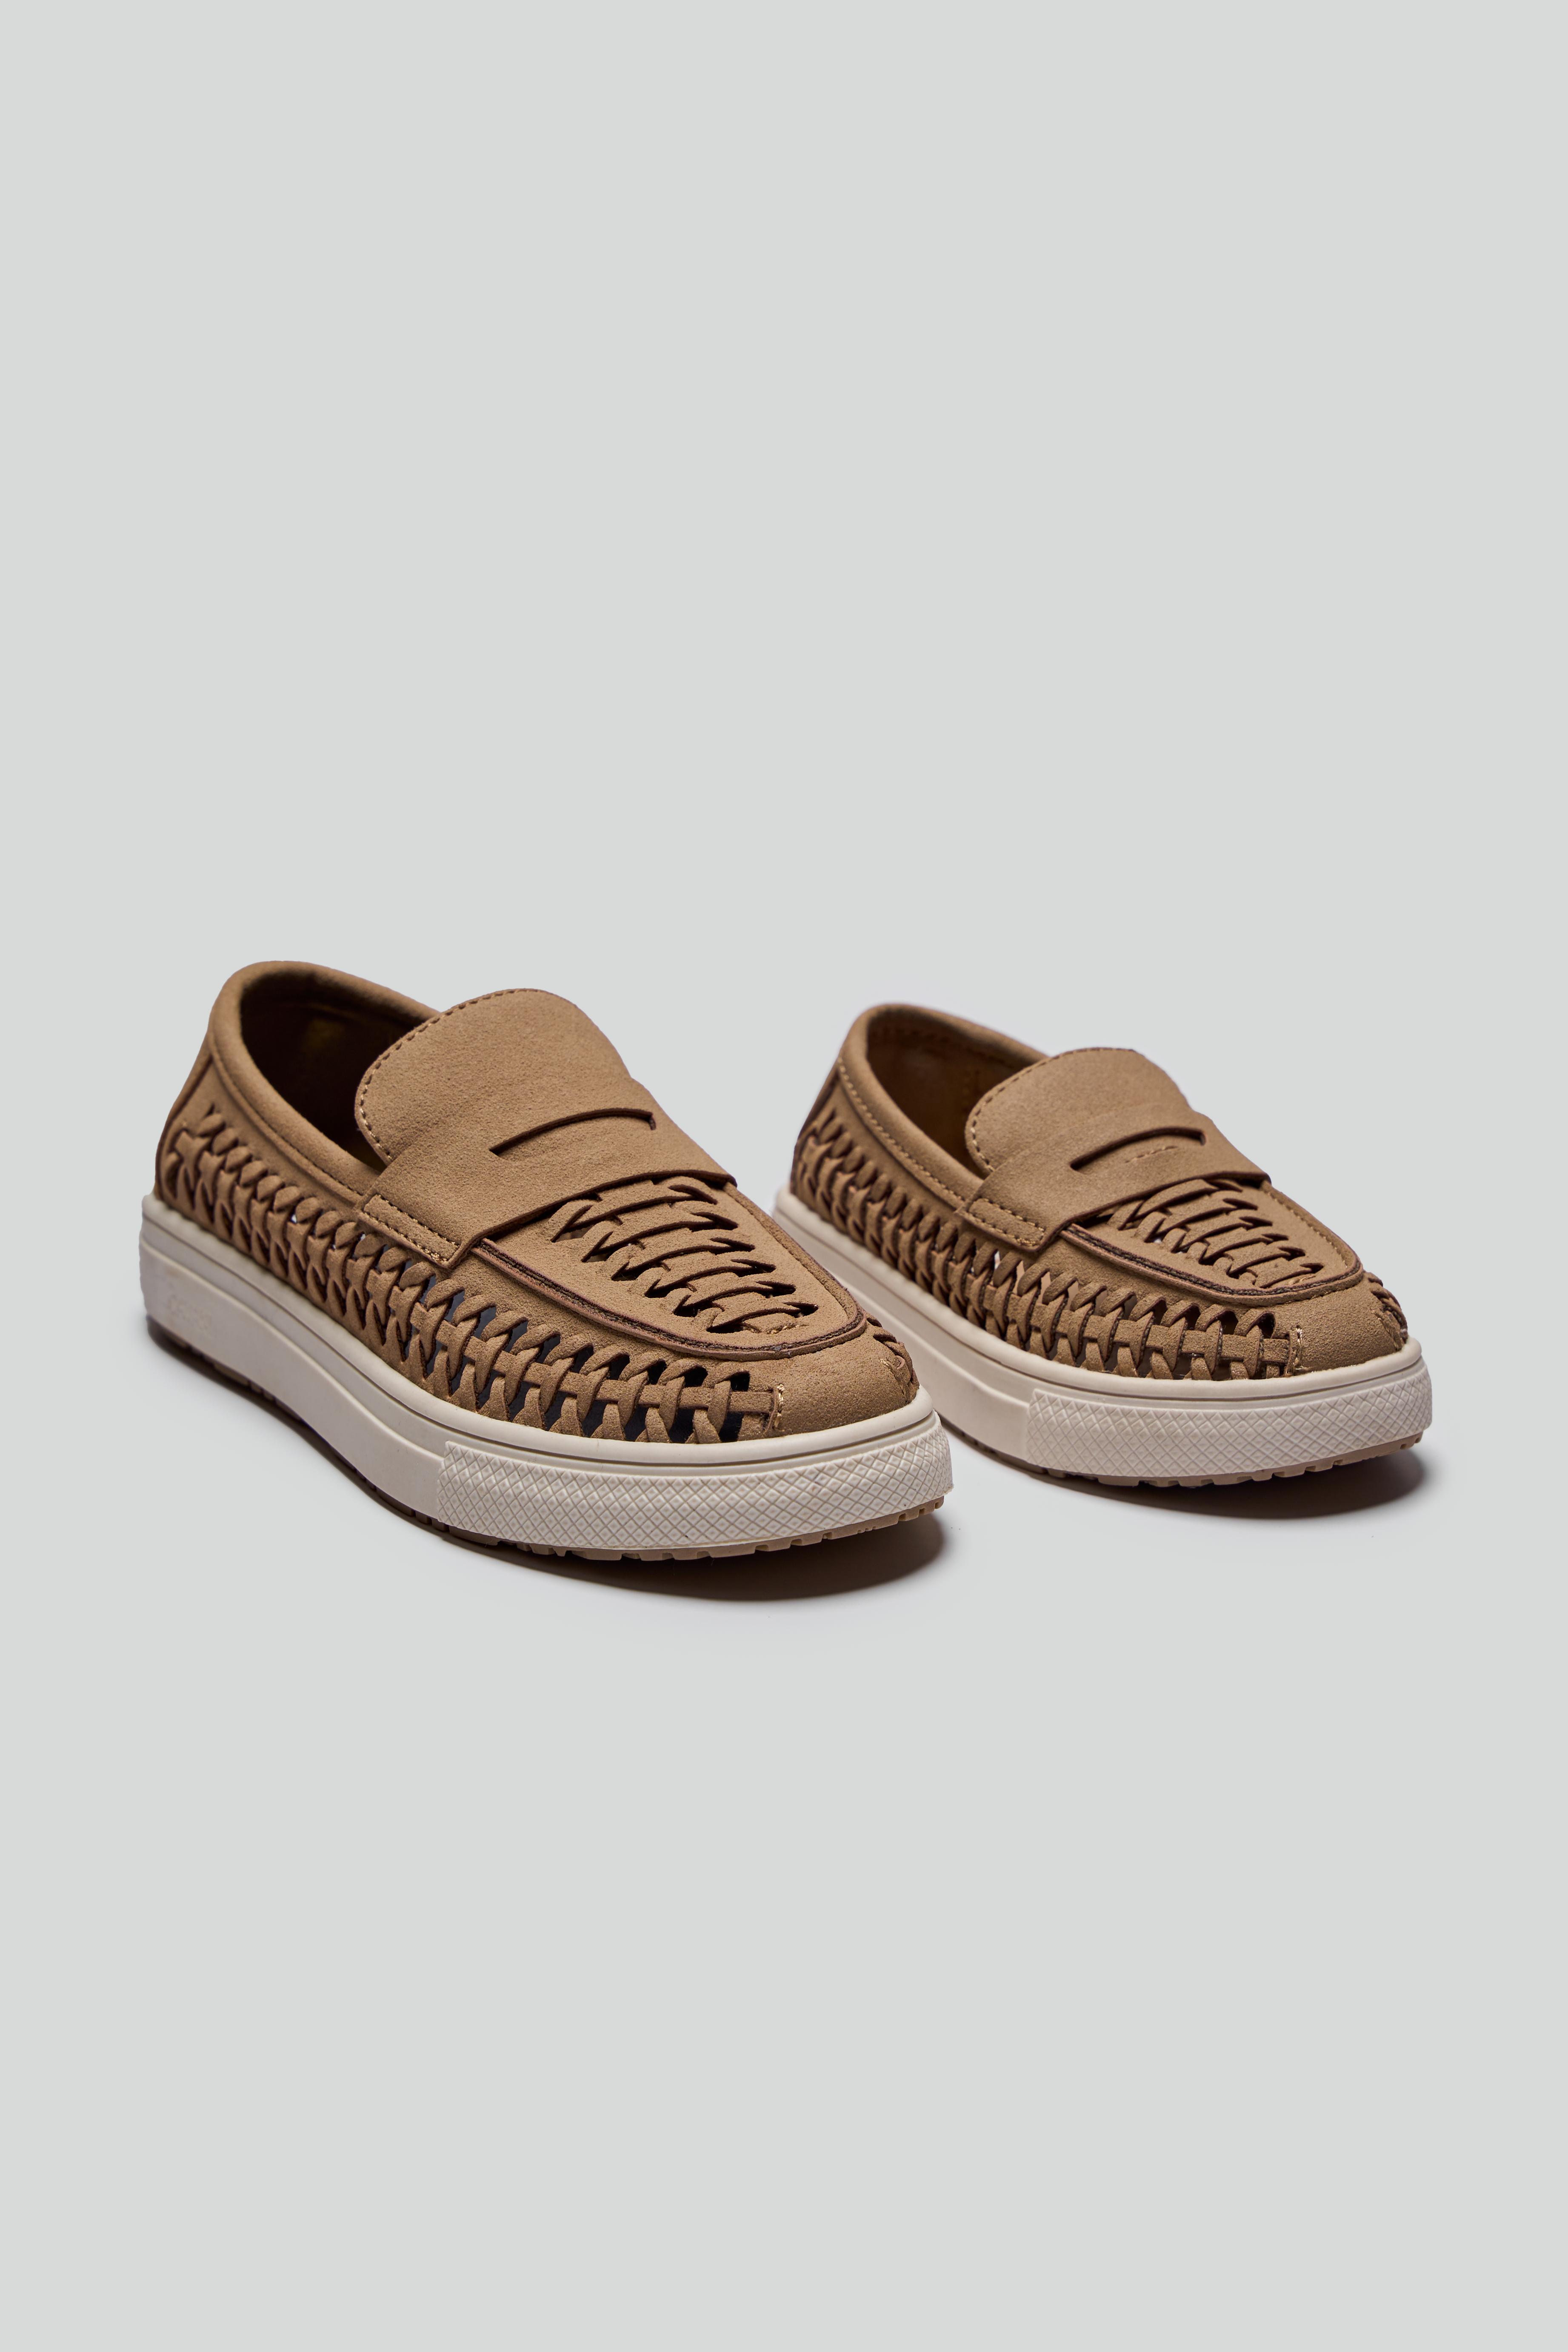 Boys Suede Penny Loafers with Woven Detail - TROY